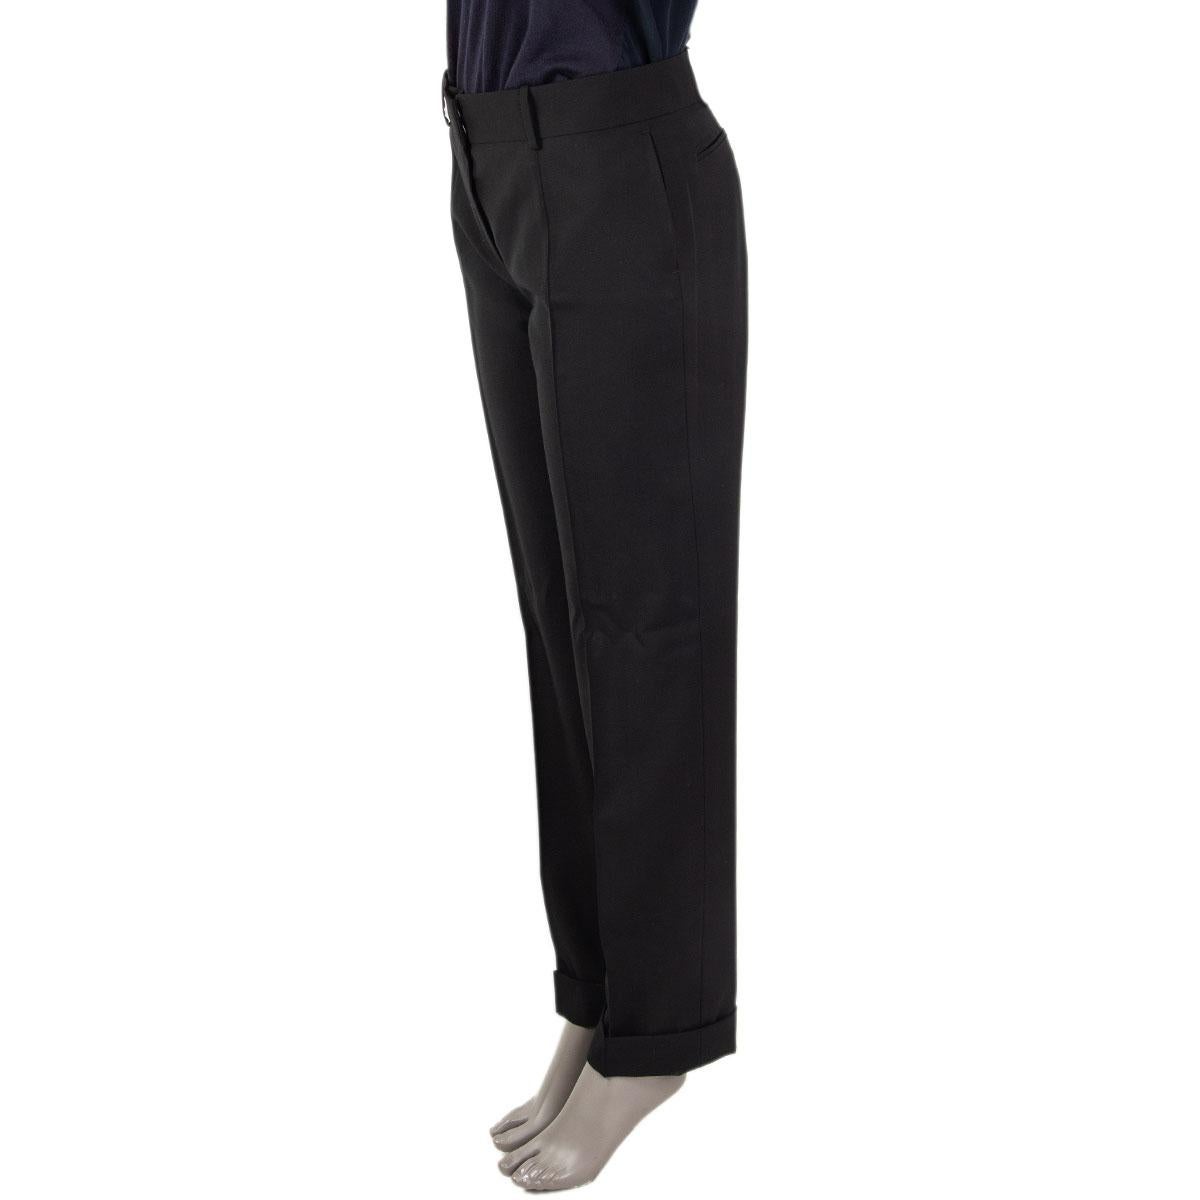 100% authentic Balenciaga classic straight-leg pants in black wool (100%) with belt loops and cuffed bottom-hem. Closes with two hooks and a concealed zipper on the front and with slit pockets at the front and two pockets at the back. Unlined. Has